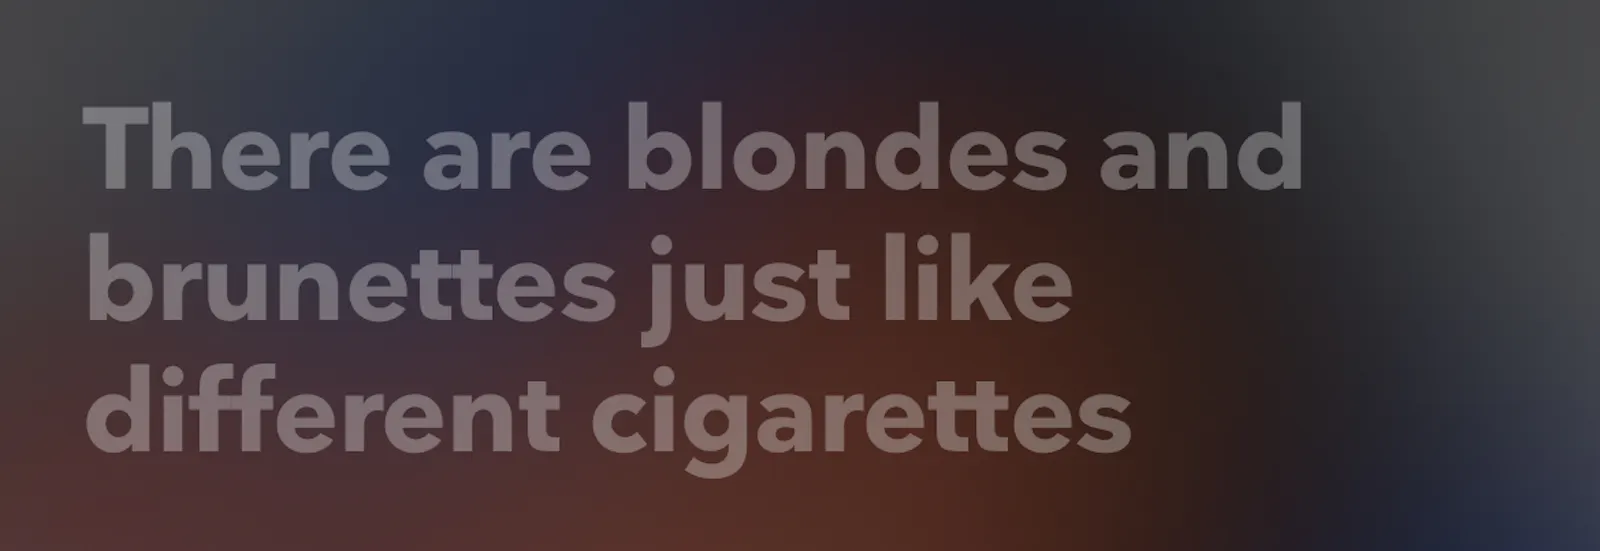 There are blondes and brunettes just like different cigarettes